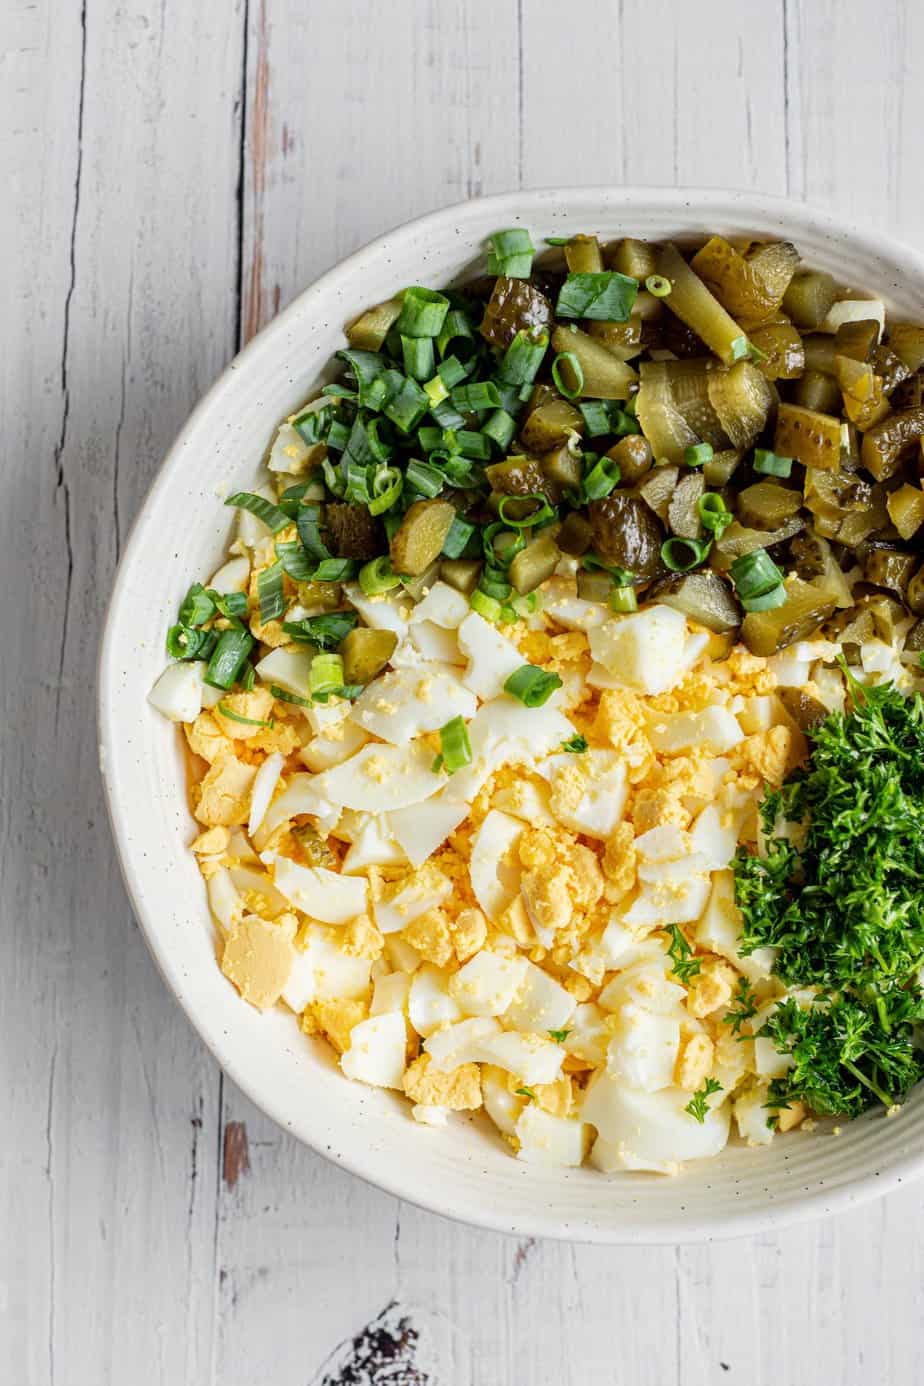 a bowl of egg salad with pickles and parsley